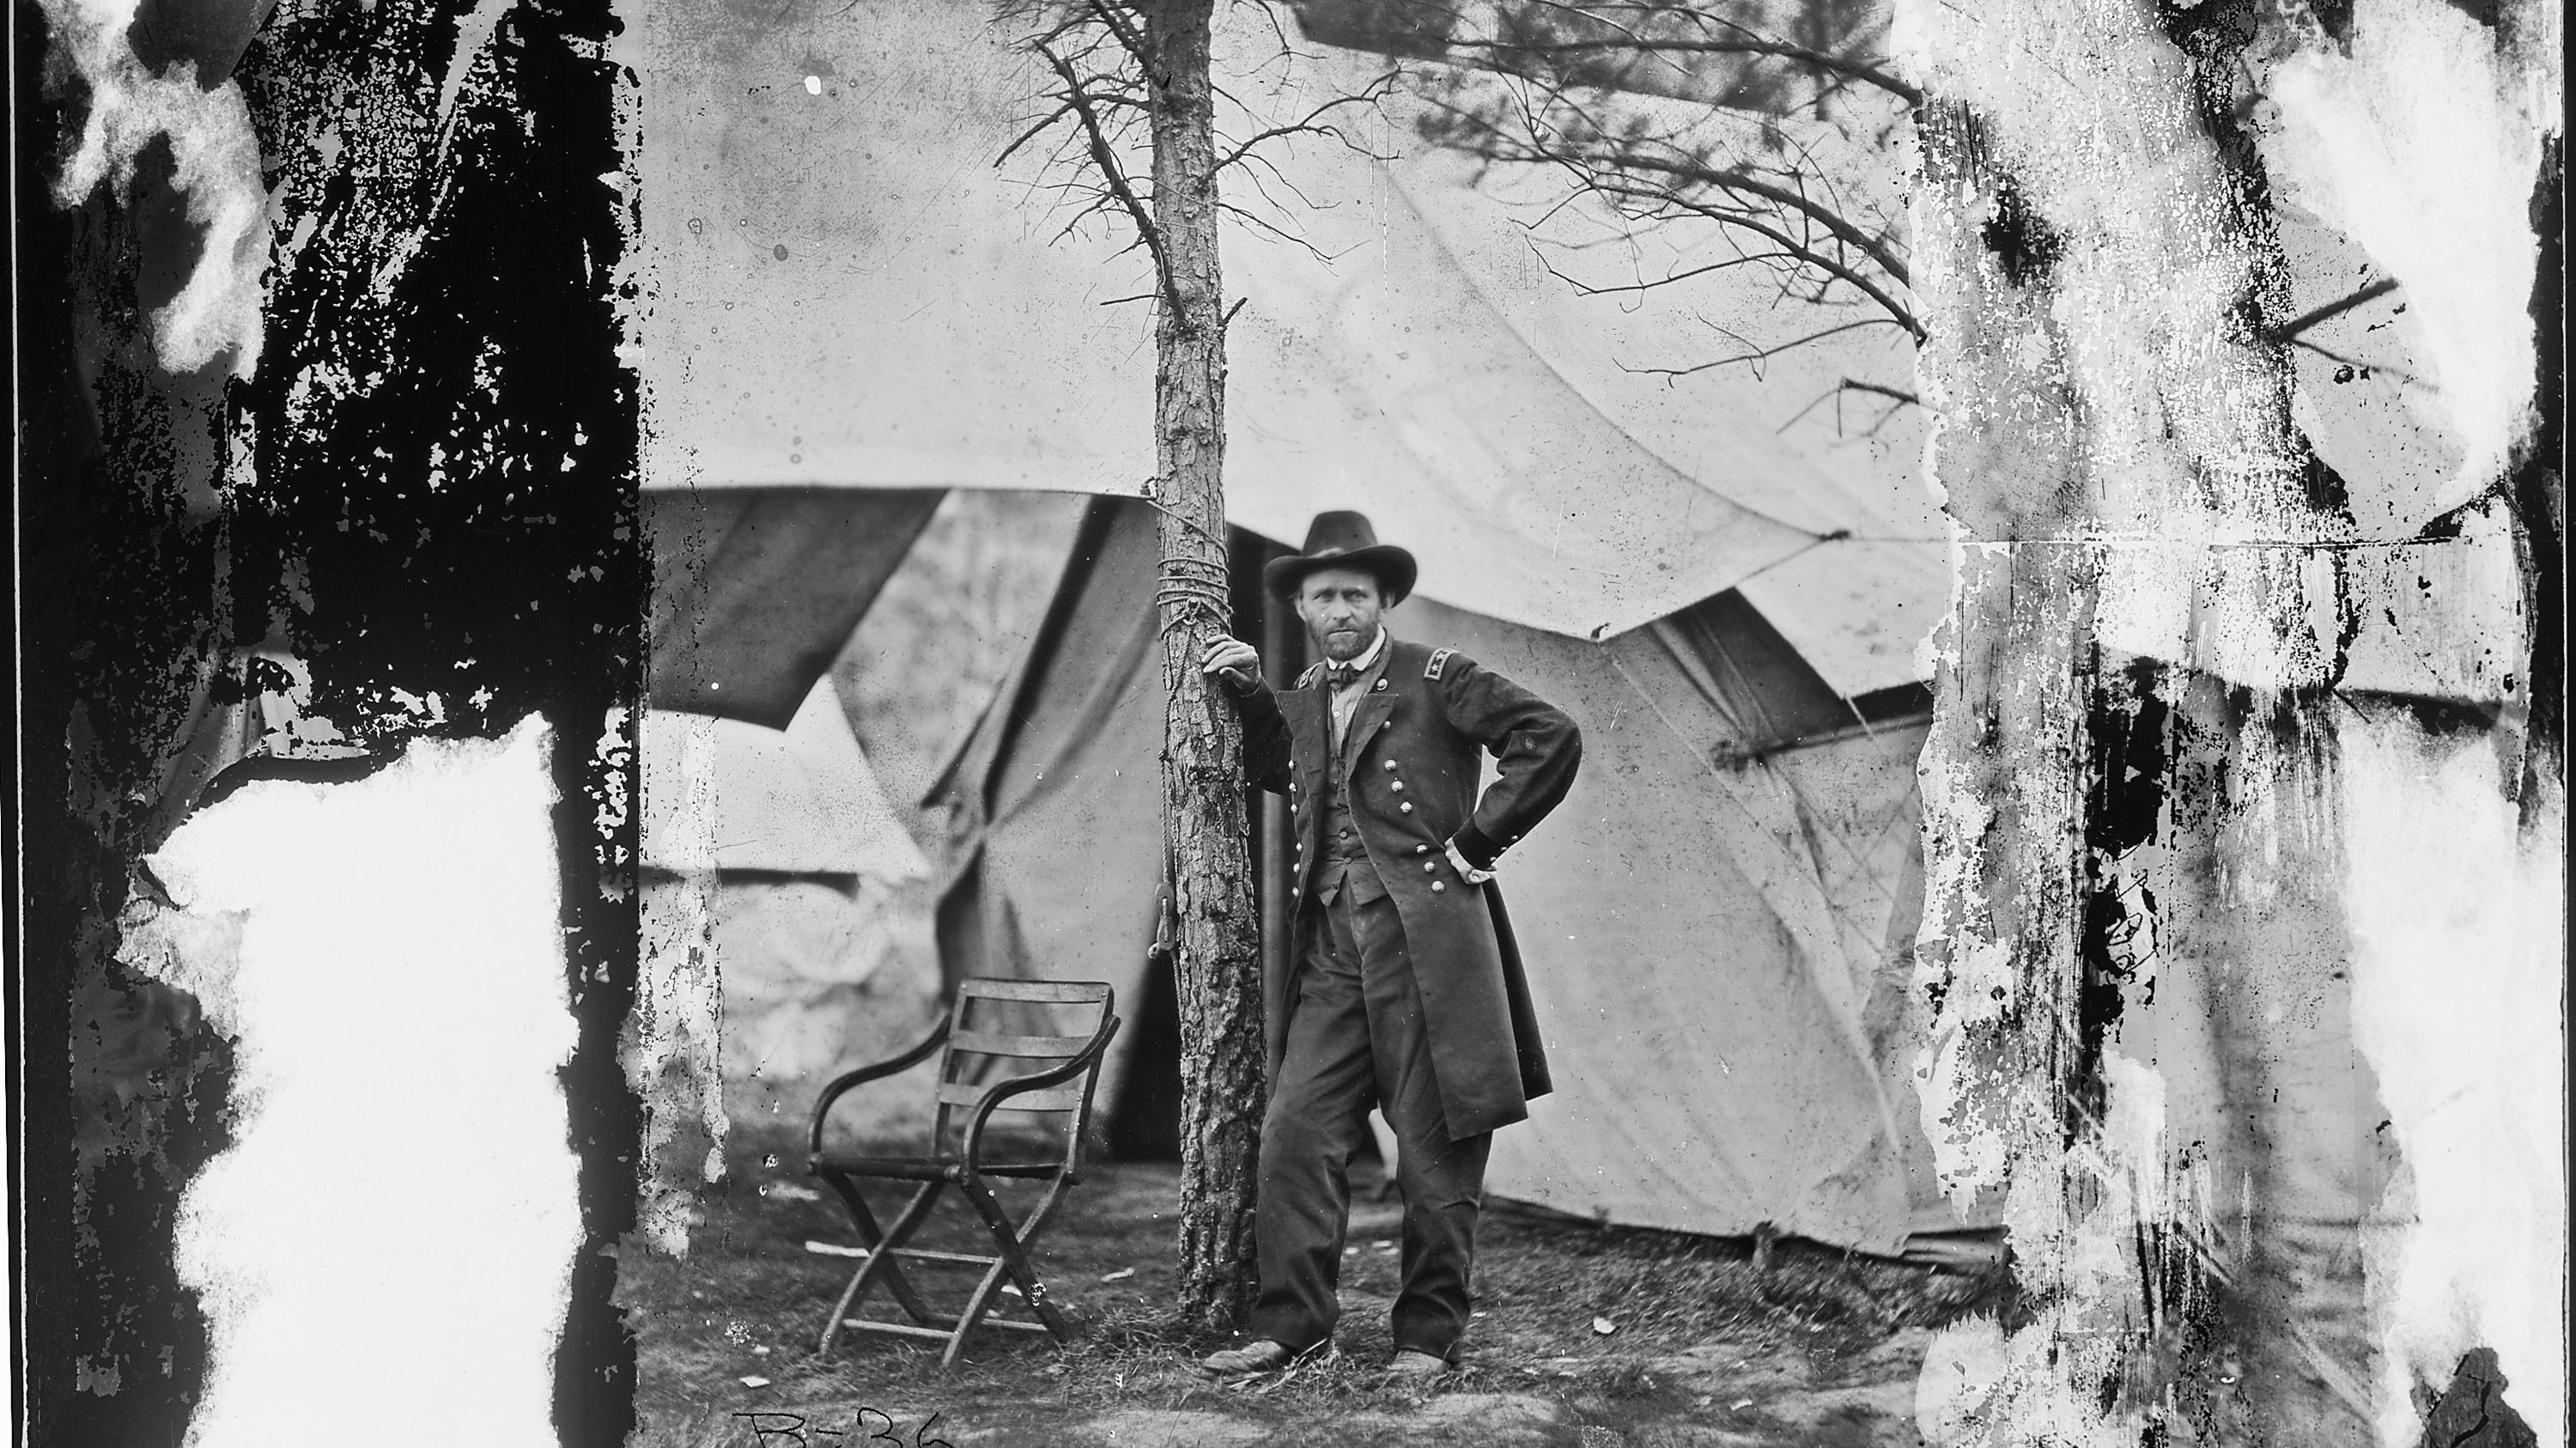 ulysses s grant facts